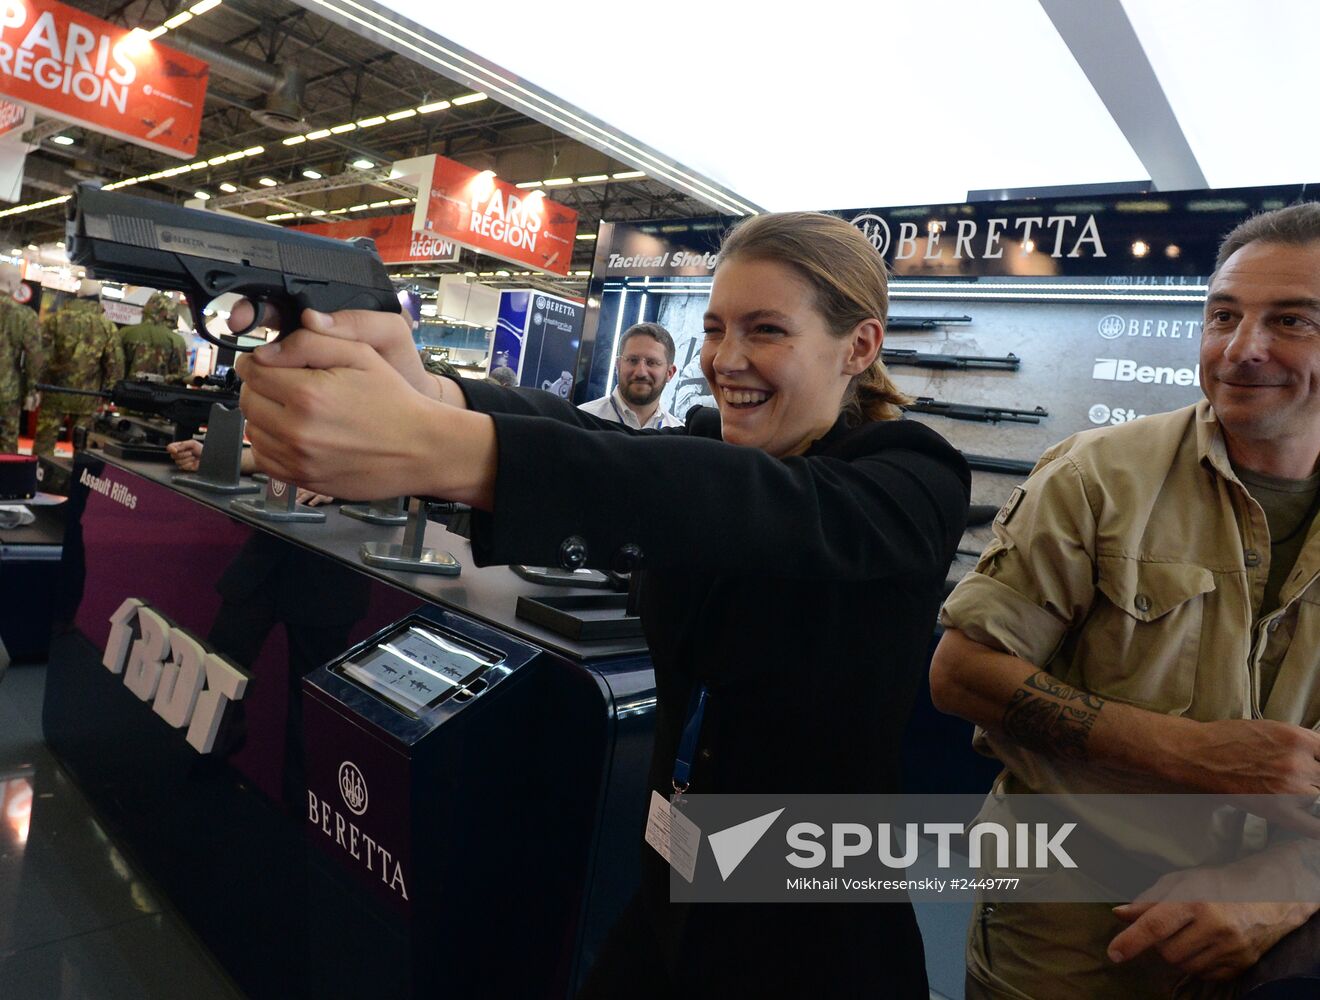 Eurosatory 2014 International Exhibition of Arms and Military equipment. Day 3